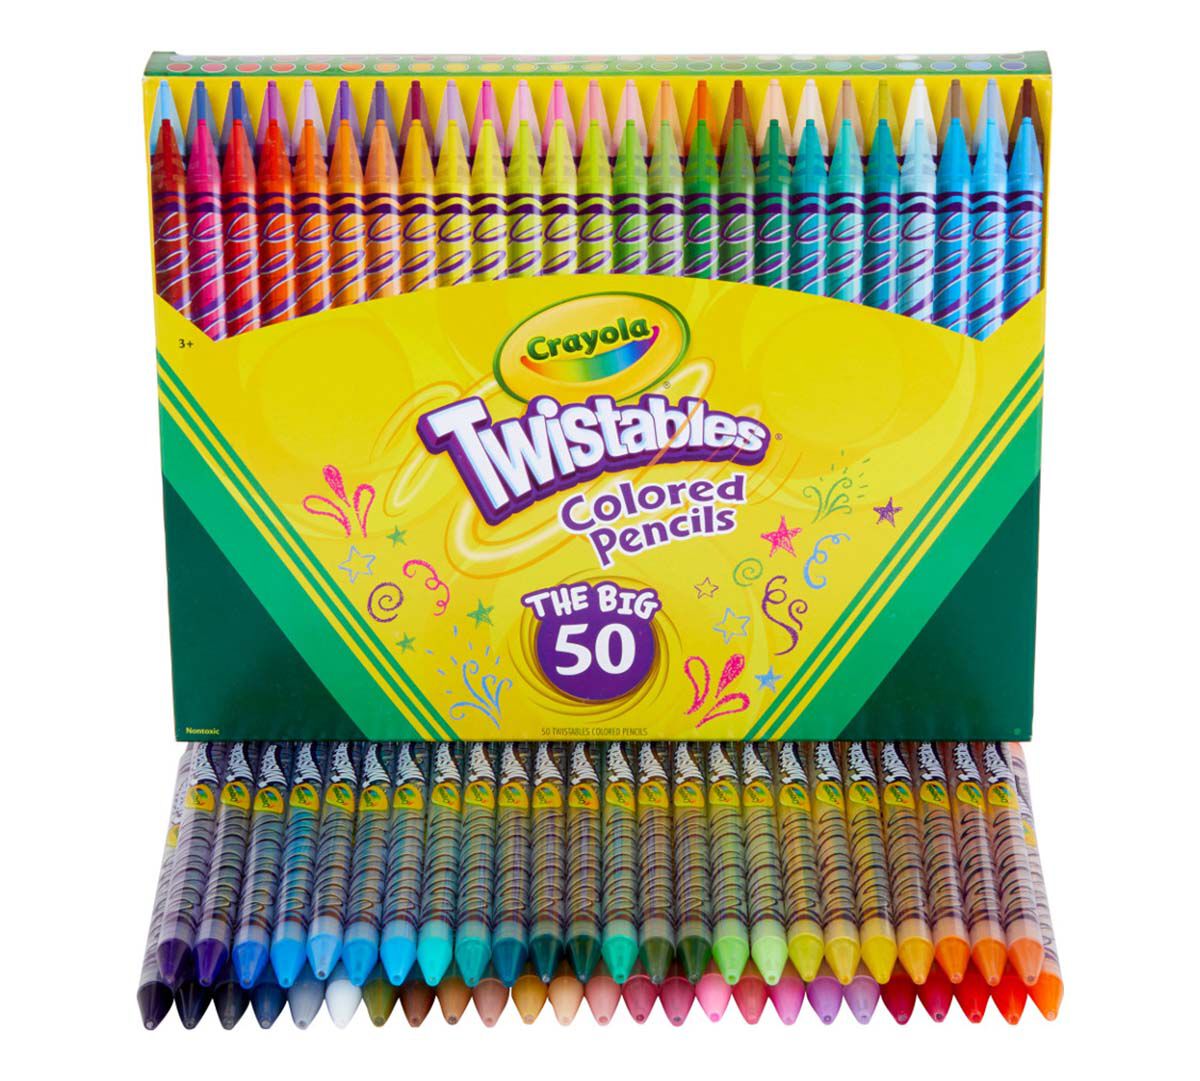 Crayola; Twistables; Colored Pencils; Art Tools; 18 Count; Vibrant Colors; Great for Adult Coloring 